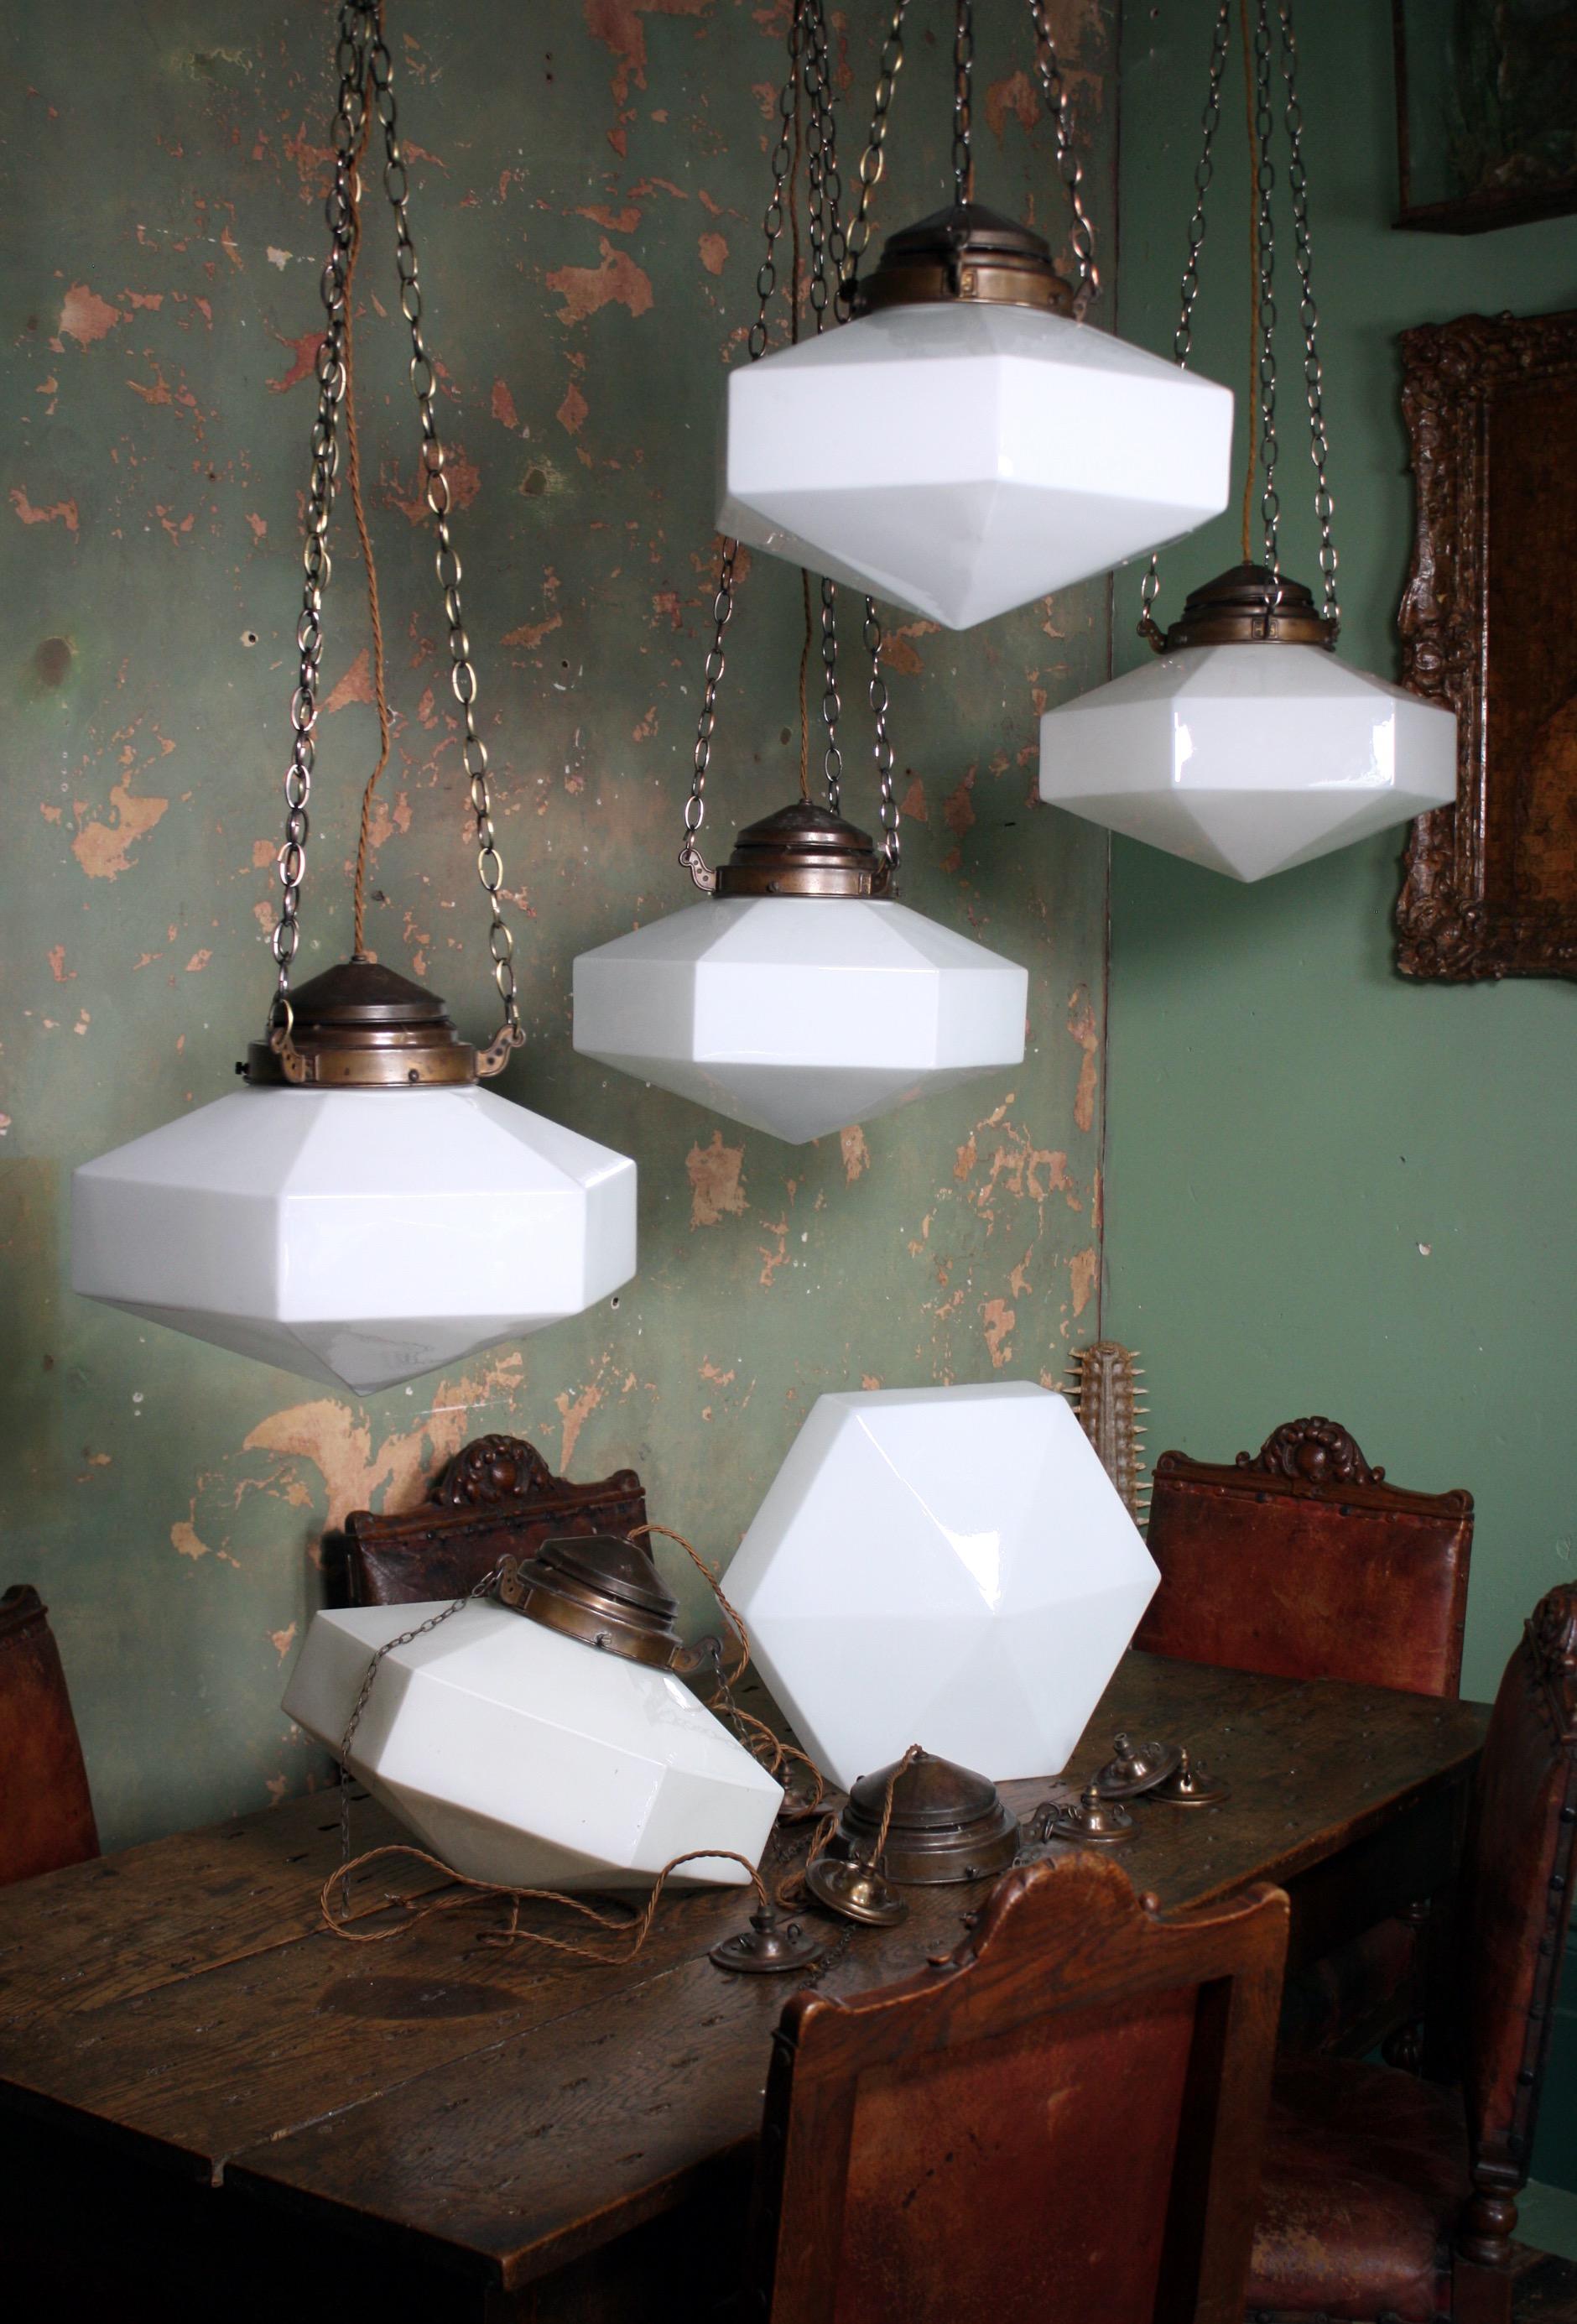 A rare run of six (3 remaining) large Hexagonal Hailwood & Ackroyd Opaline pendants with a conical underbelly

The bronze galleries have a decorative three arm hanging system with an enclosed cap, the galleries and glass are stamped with the makers